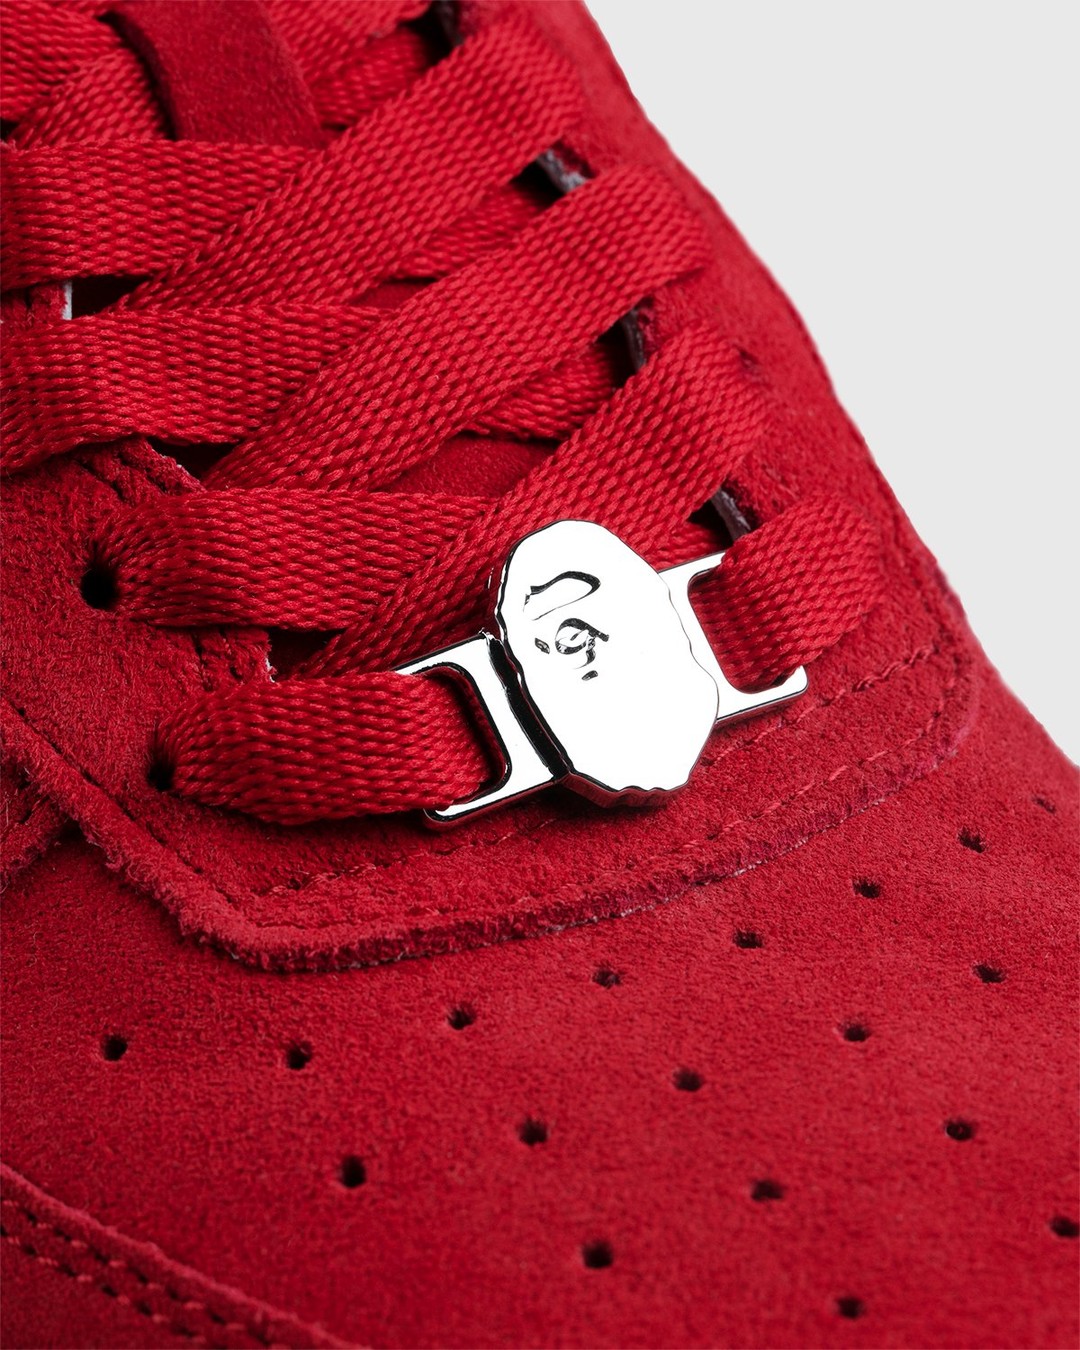 BAPE x Highsnobiety – BAPE STA Red - Sneakers - Red - Image 6